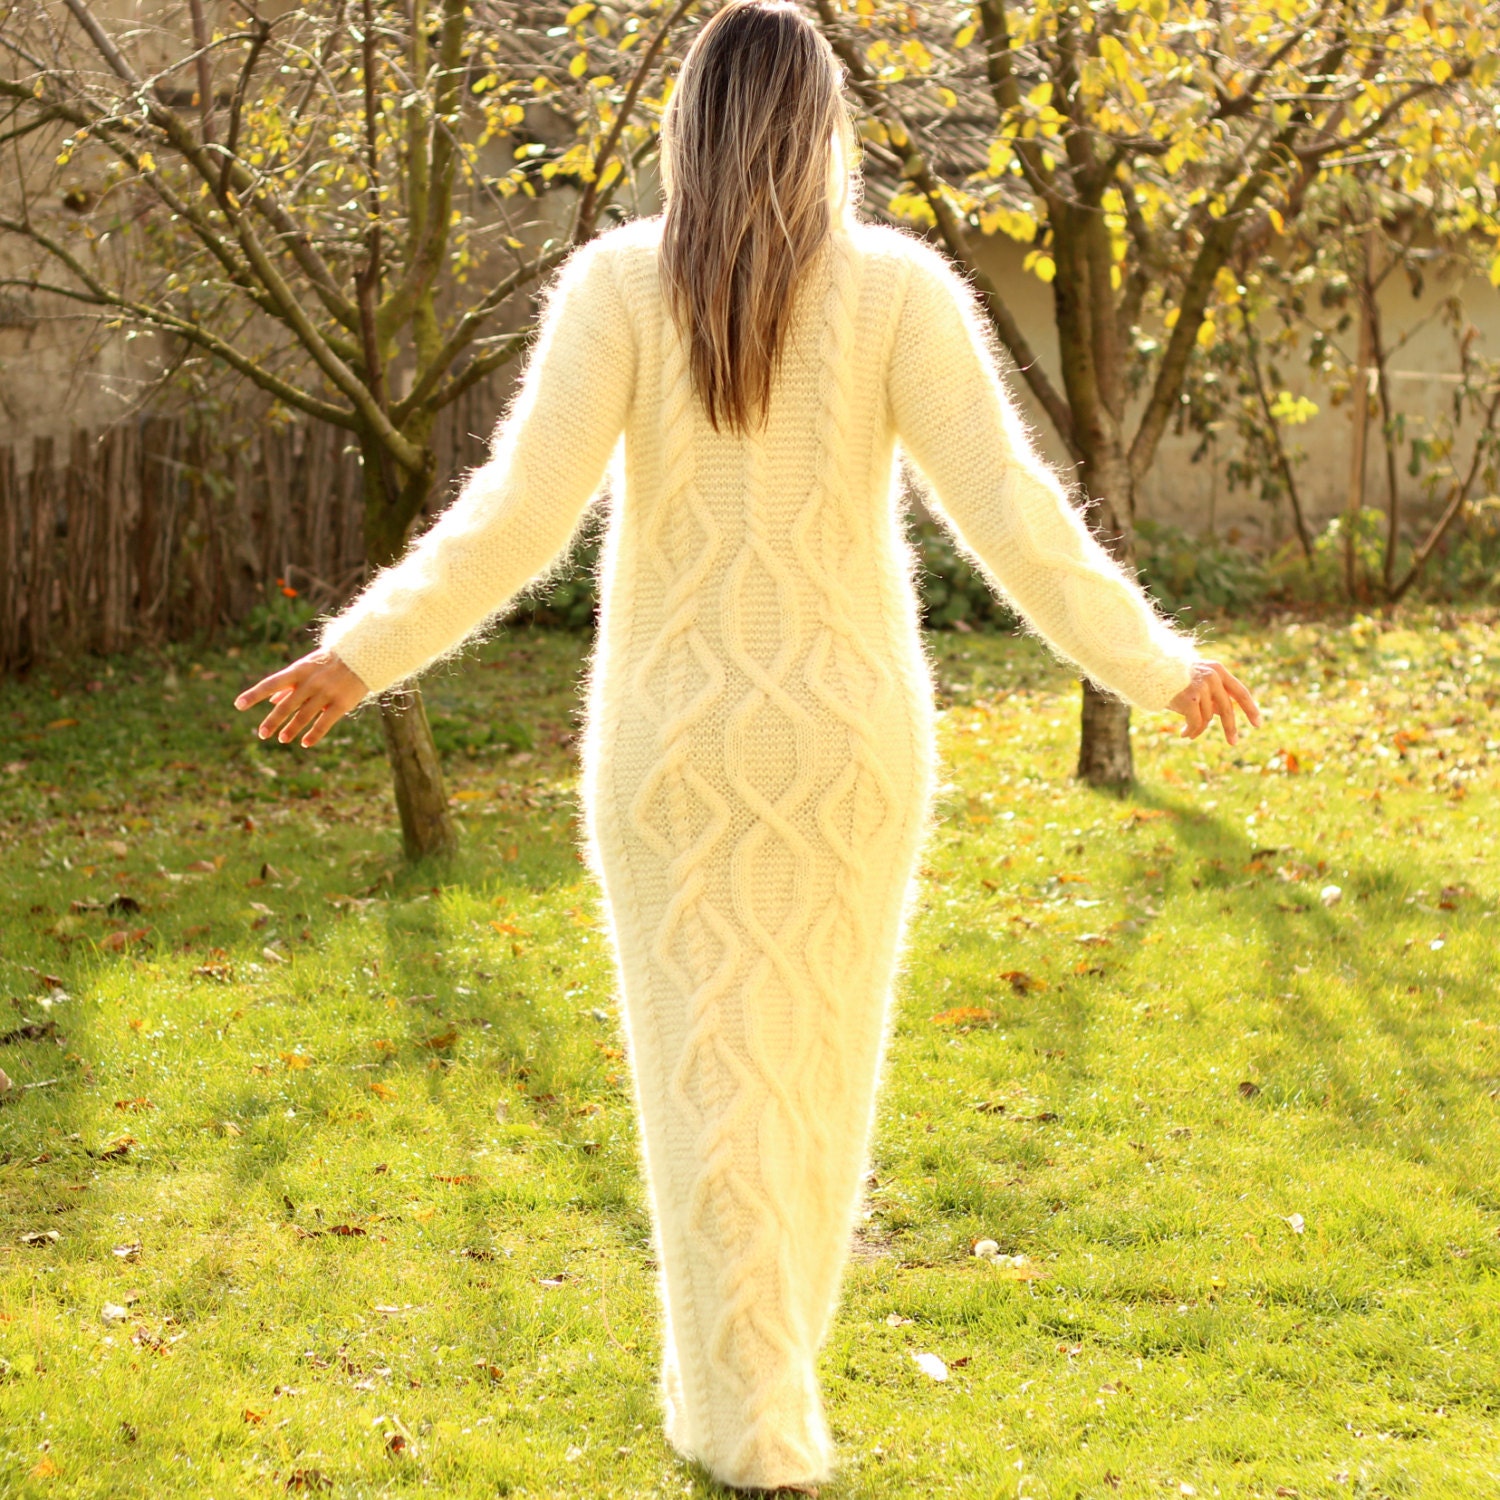 Hand Knitted Mohair Dress Off White Fuzzy Fetish Jersey | Etsy